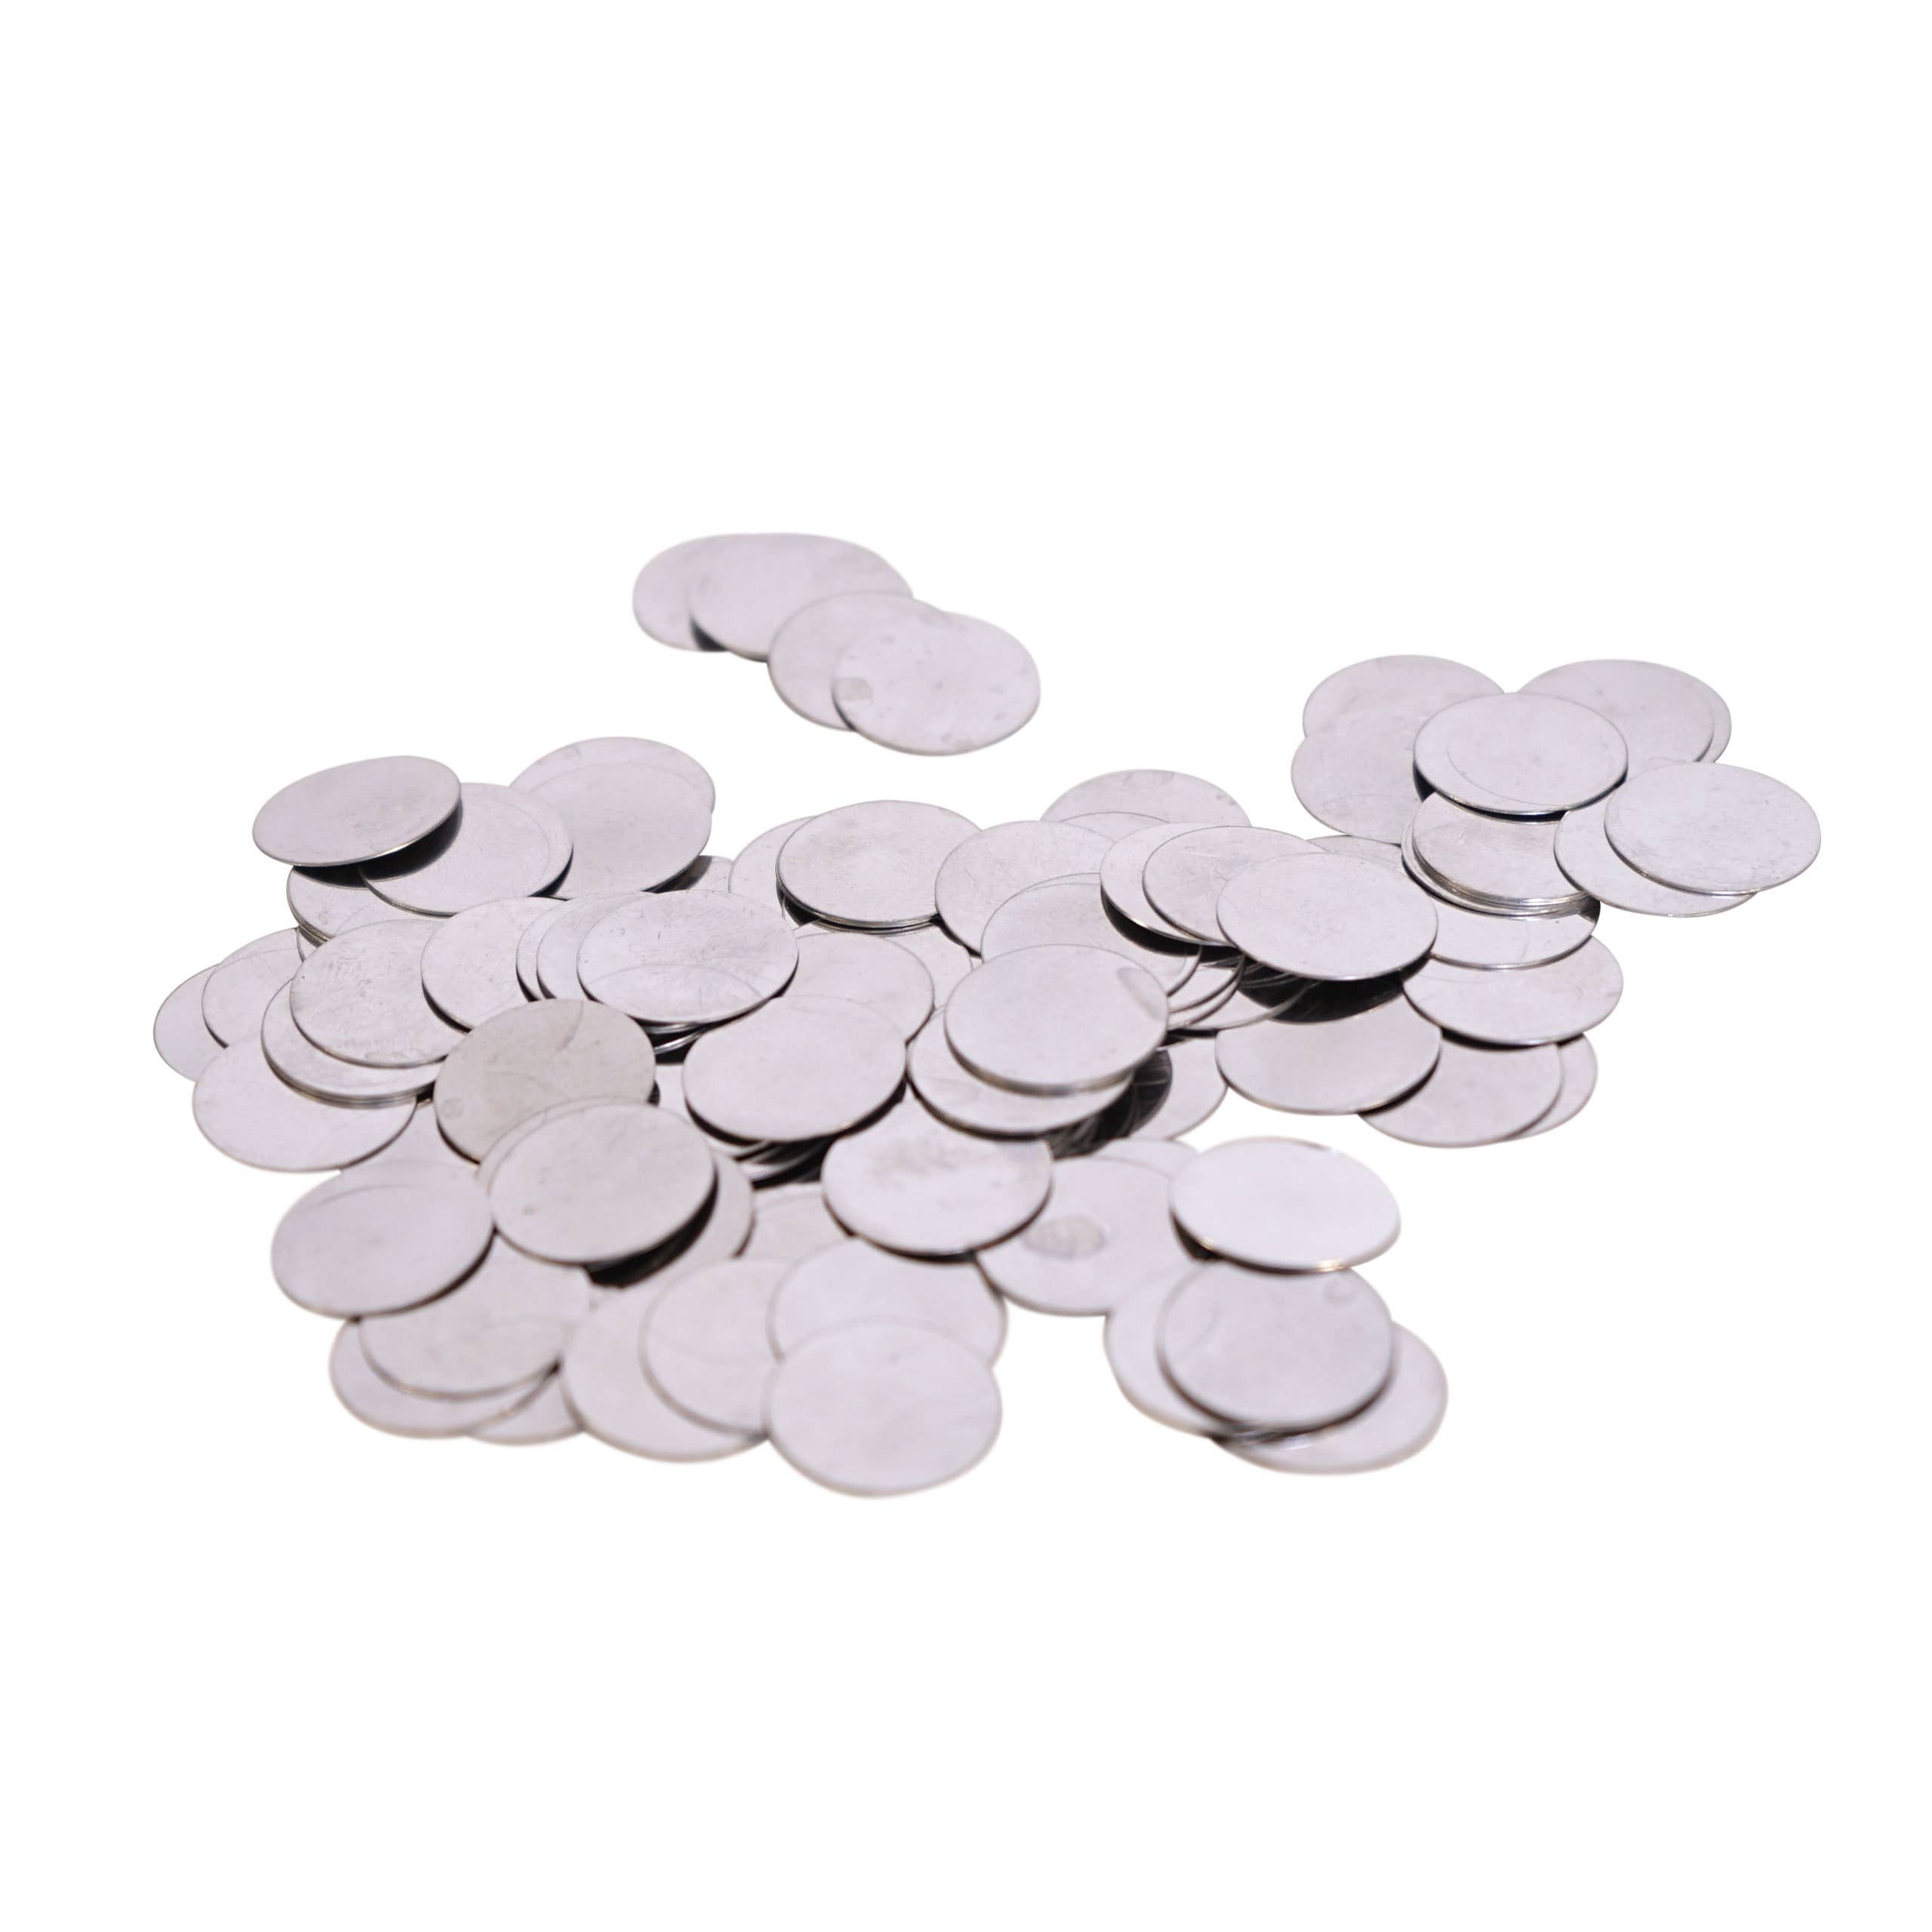 Metal Plates / Metal Discs Made of Magnetic Stainless Steel 